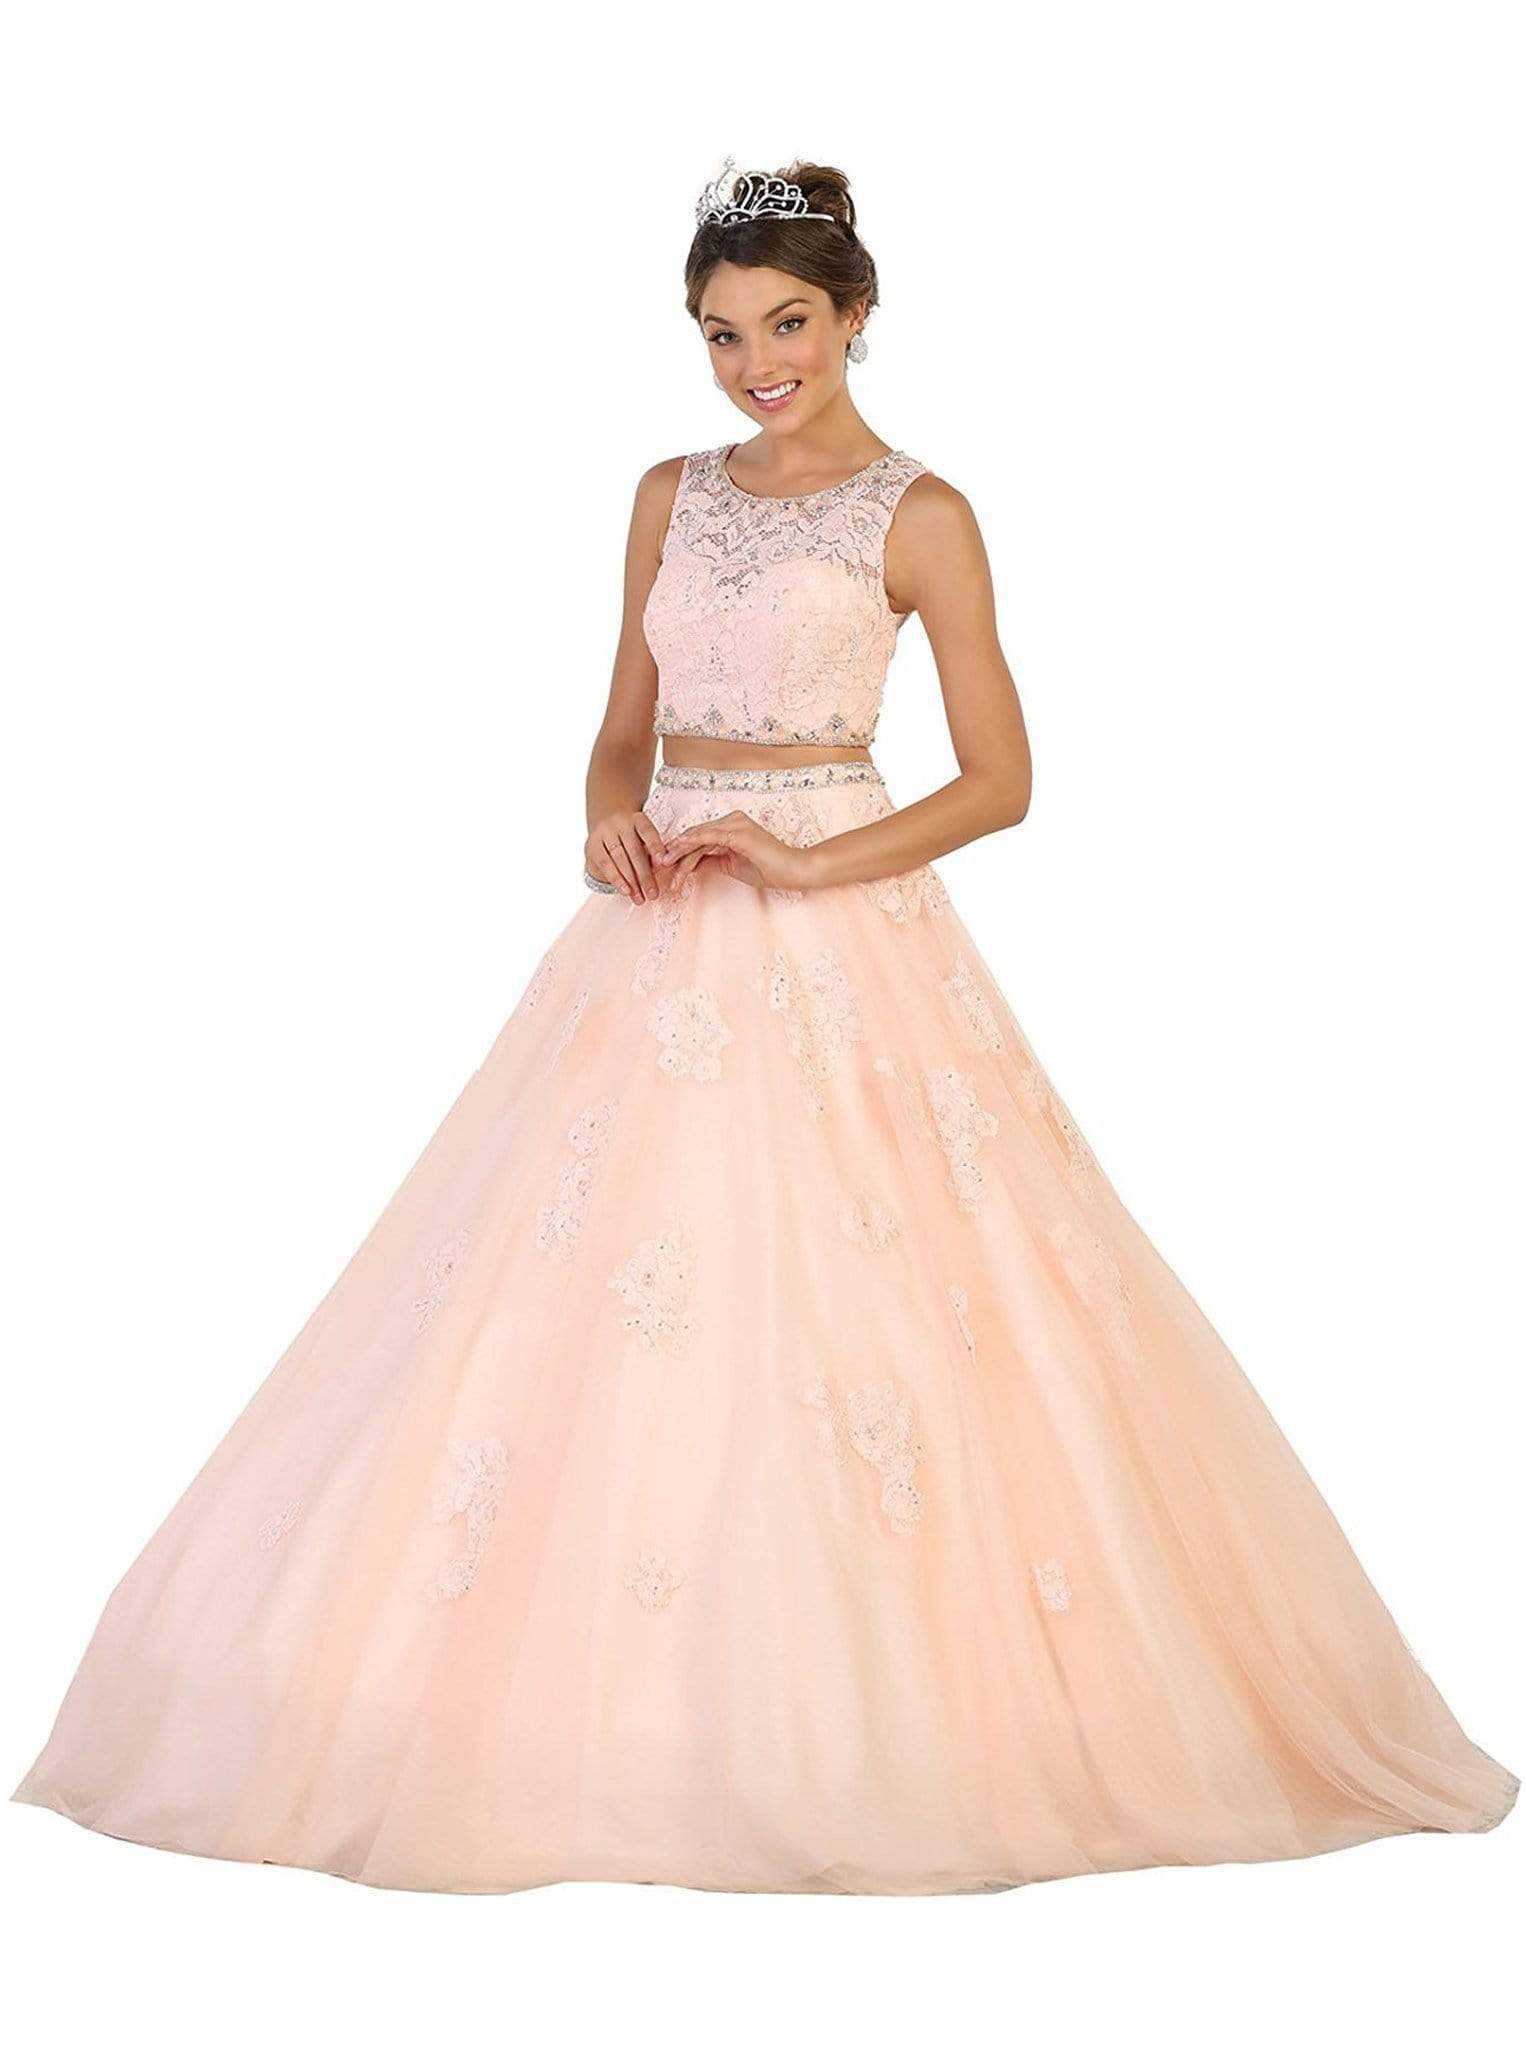 May Queen, May Queen - Two Piece Embellished Evening Gown